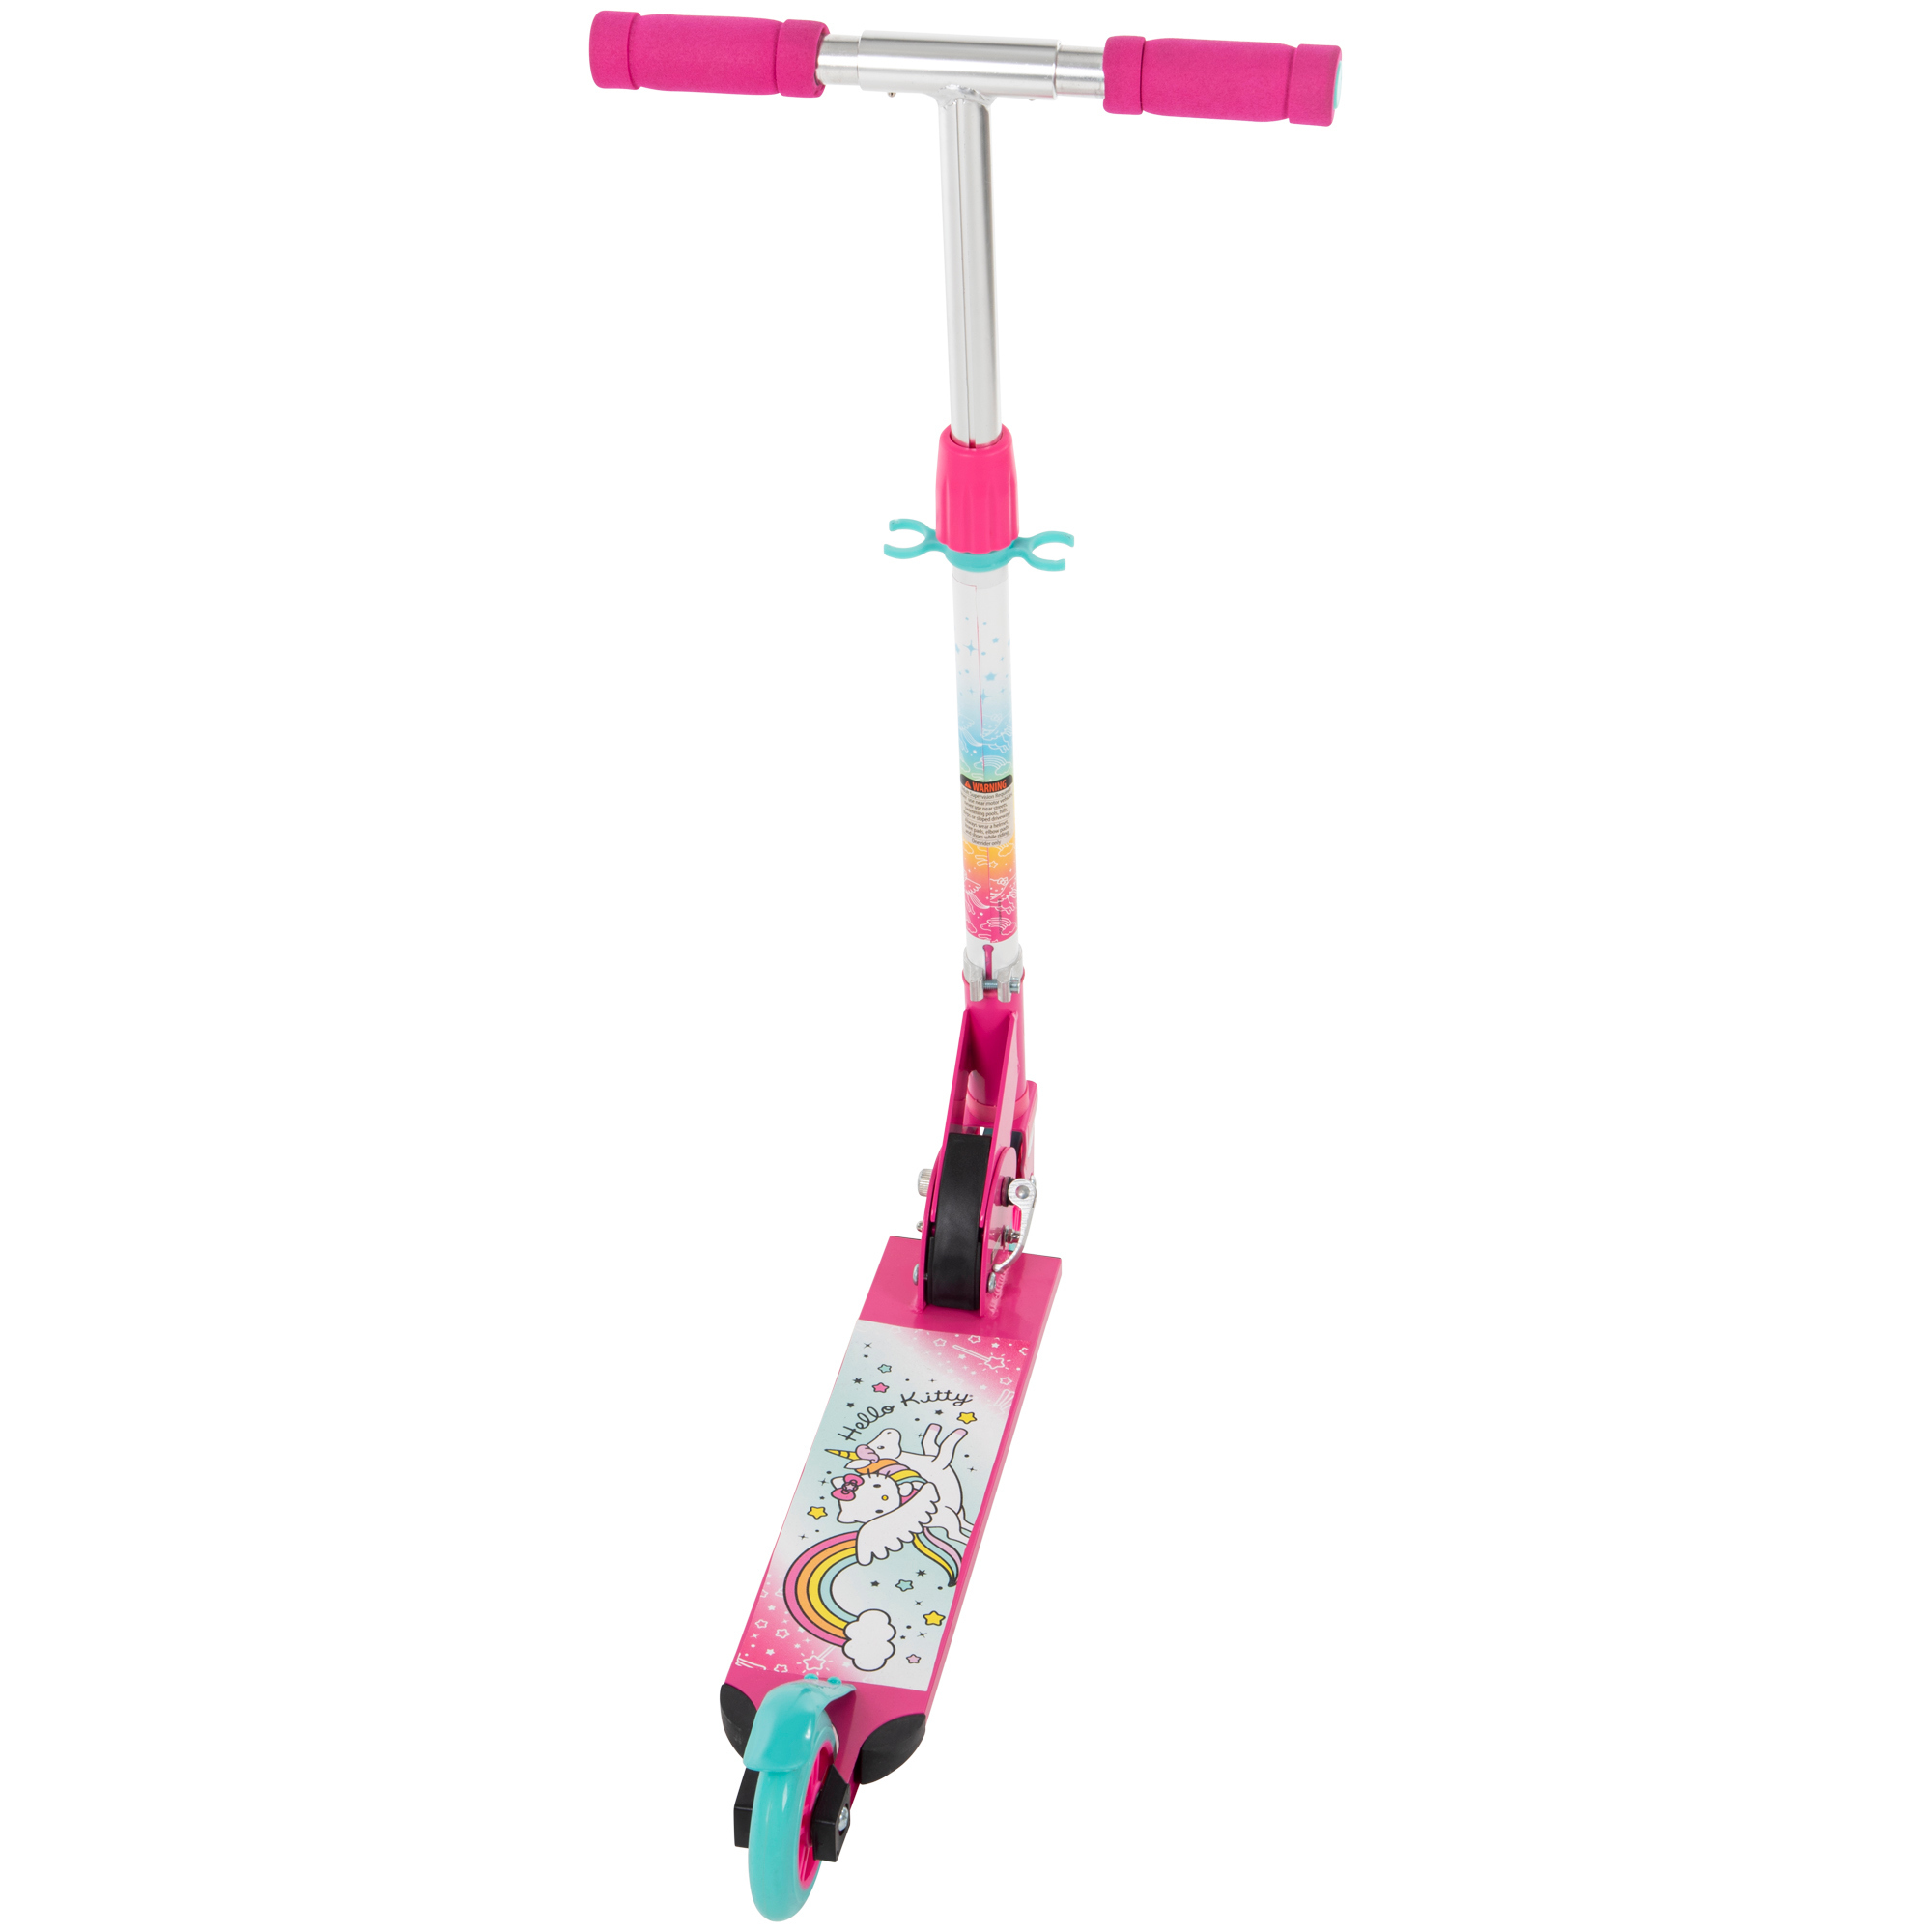 Hello Kitty Girls Inline Scooter, Pink, by Huffy - image 4 of 9